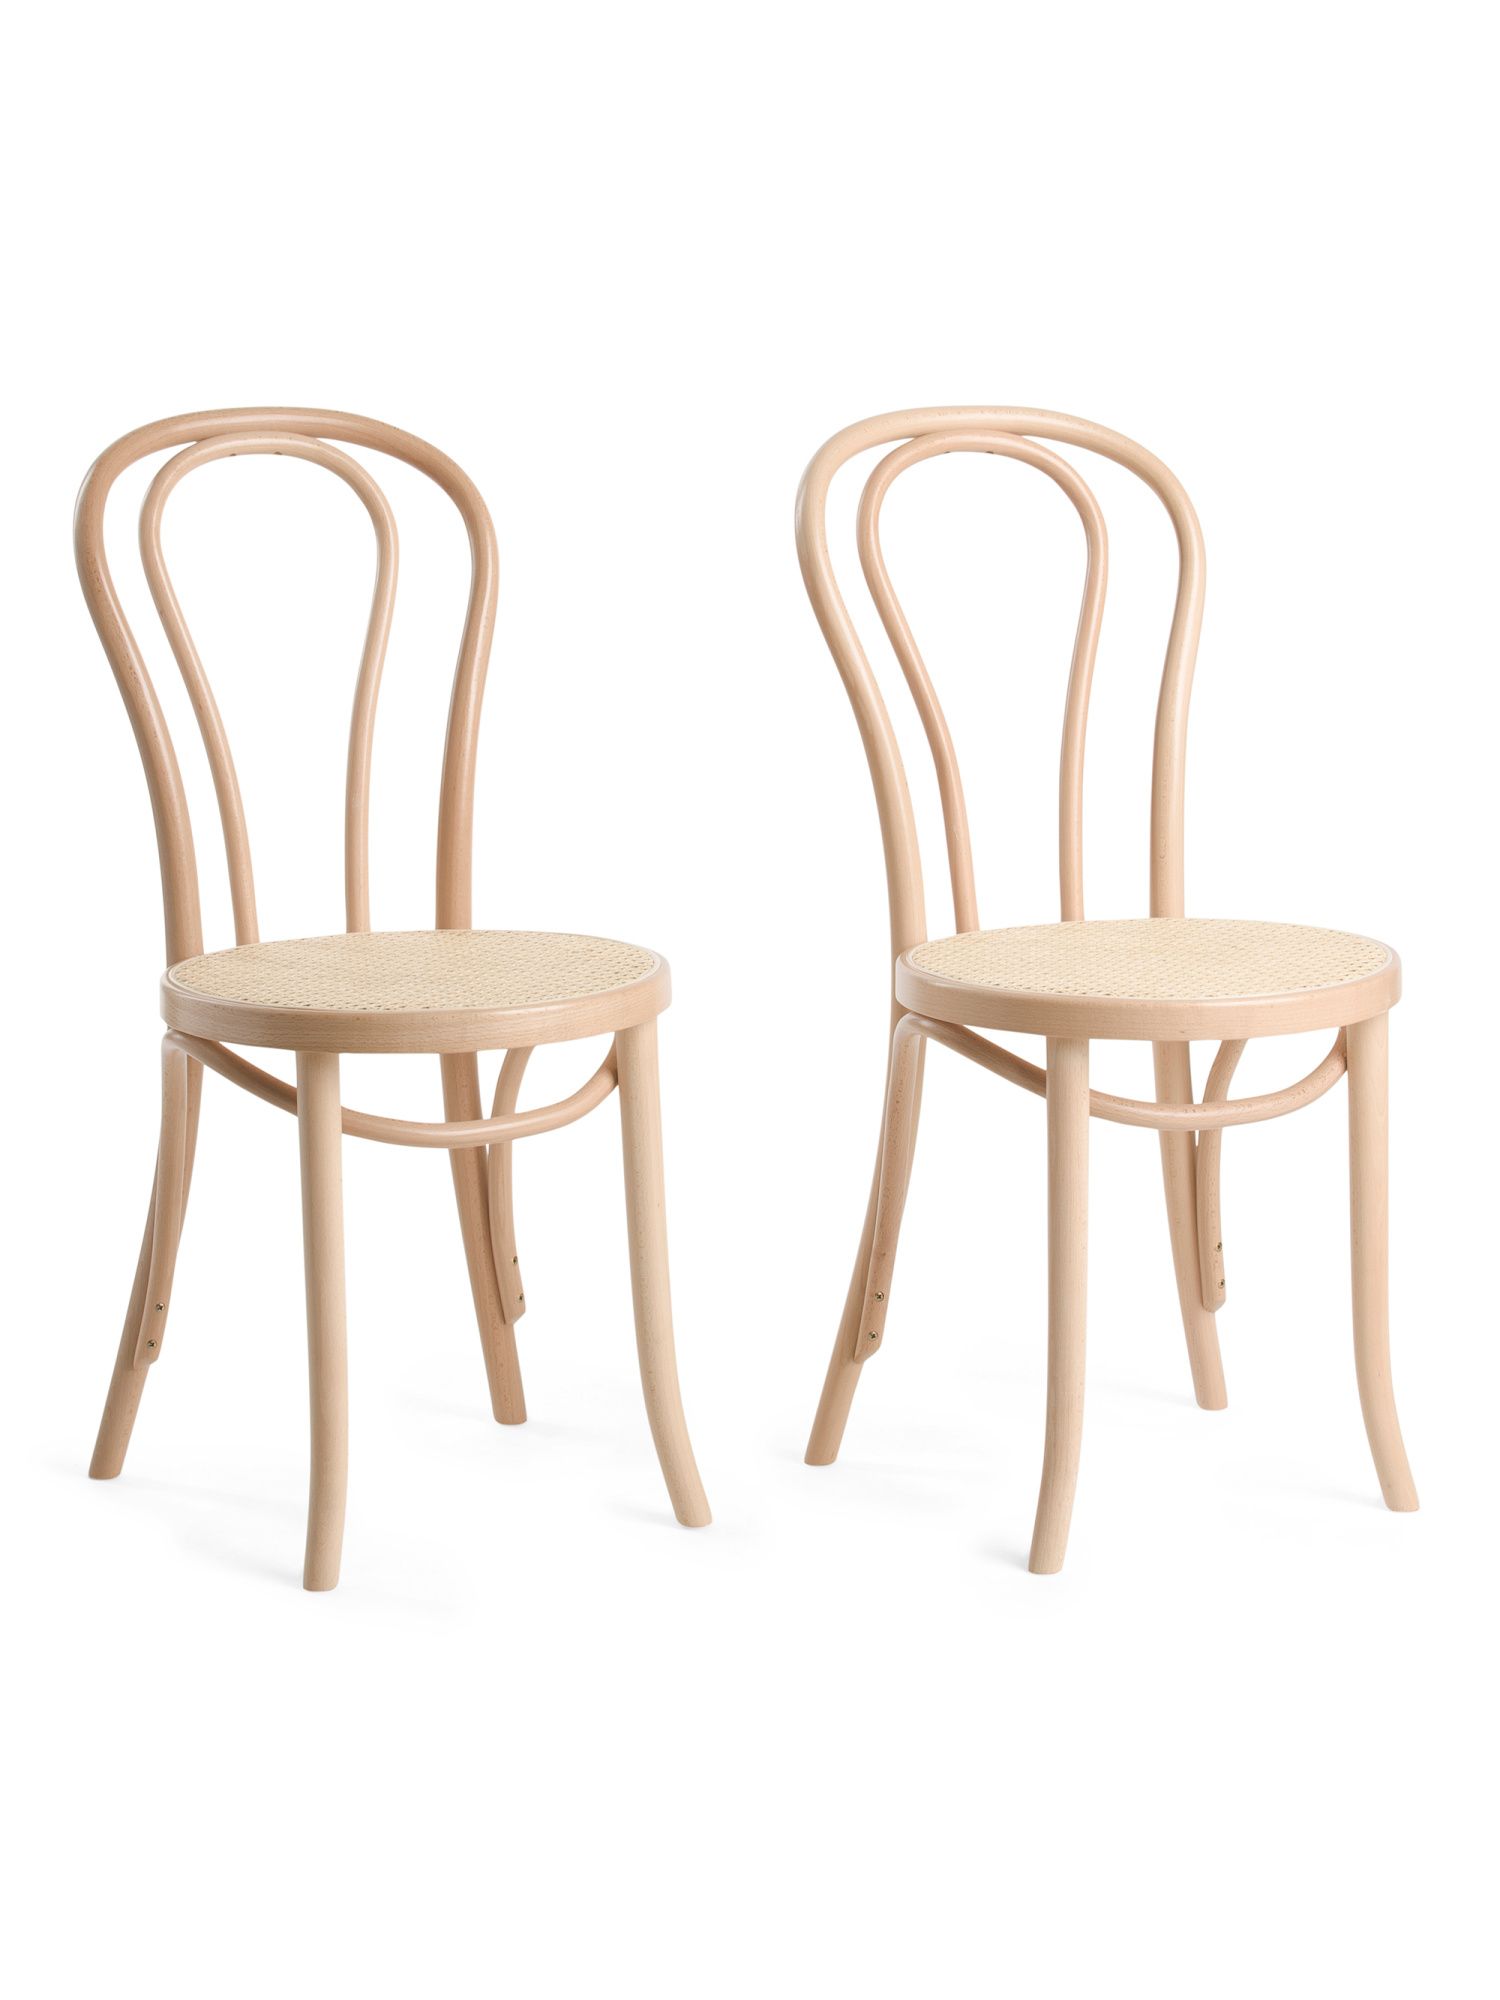 Set Of 2 Solid Beech Dining Chairs With Cane Seats | TJ Maxx